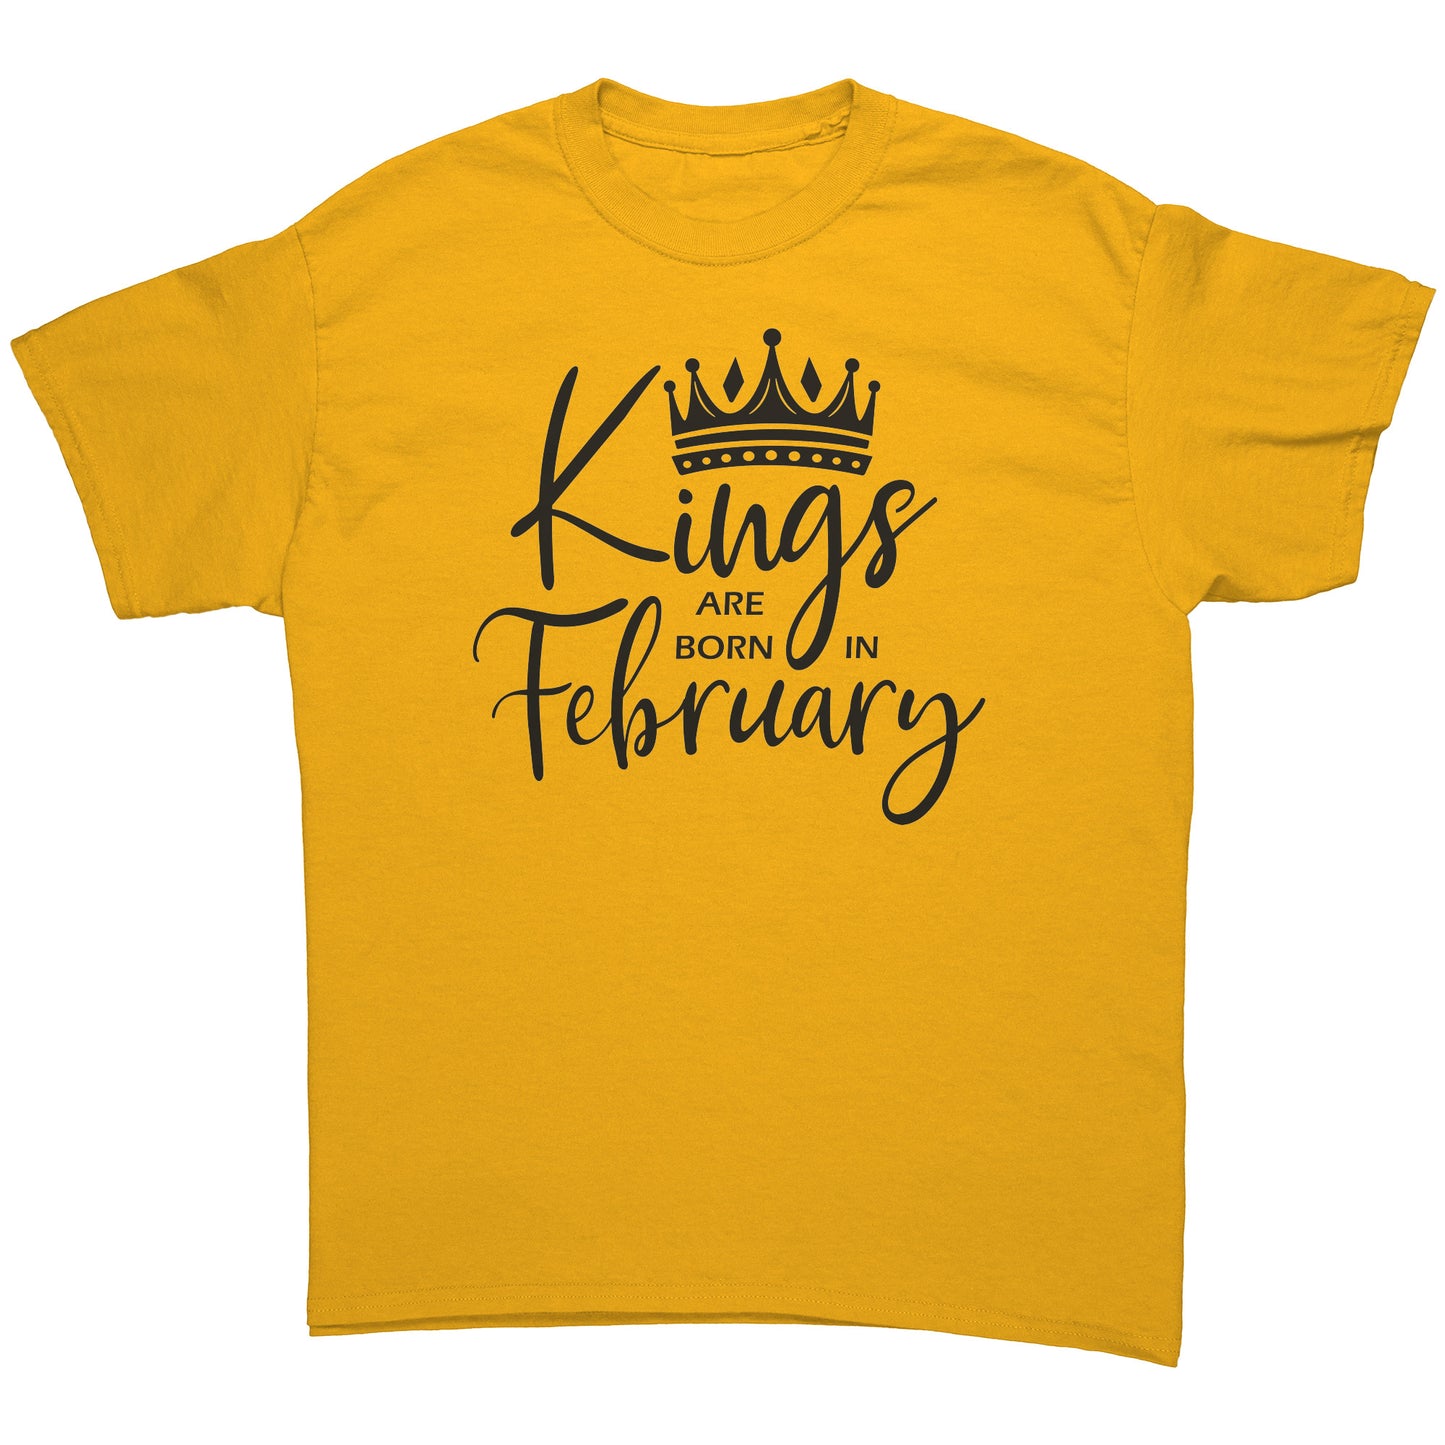 Kings Are Born In February Tee